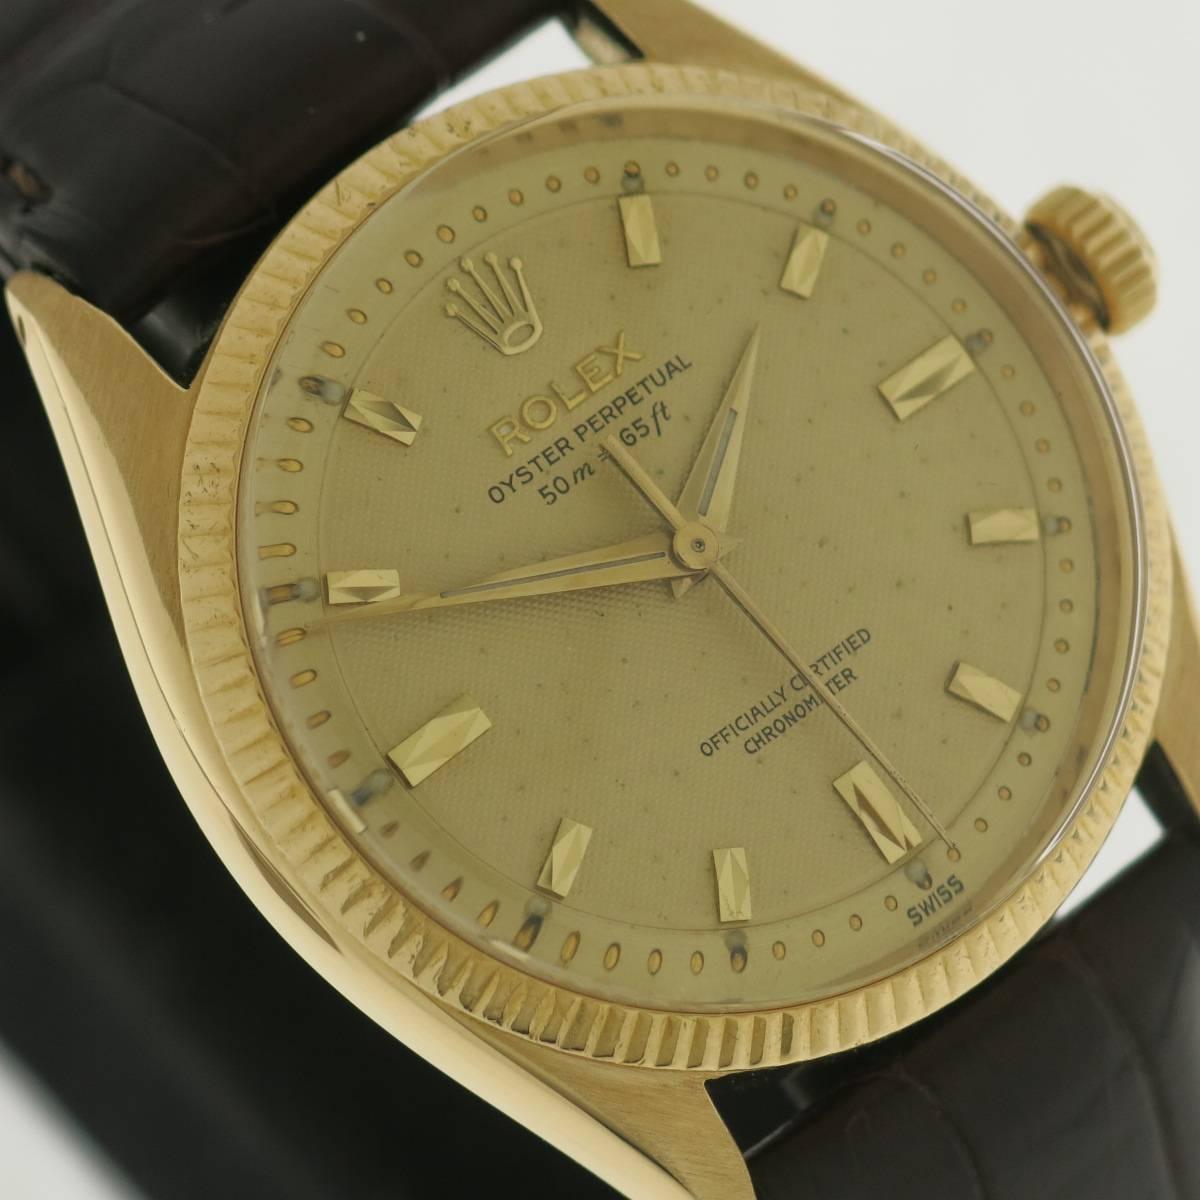 Unusual and very rare 18 KT.yellow gold Rolex oyster,water resistant case with special honeycomb dial and registered meters and feet. Doré color dial with applied gold indexes and dauphine hands. Sweep centre seconds.